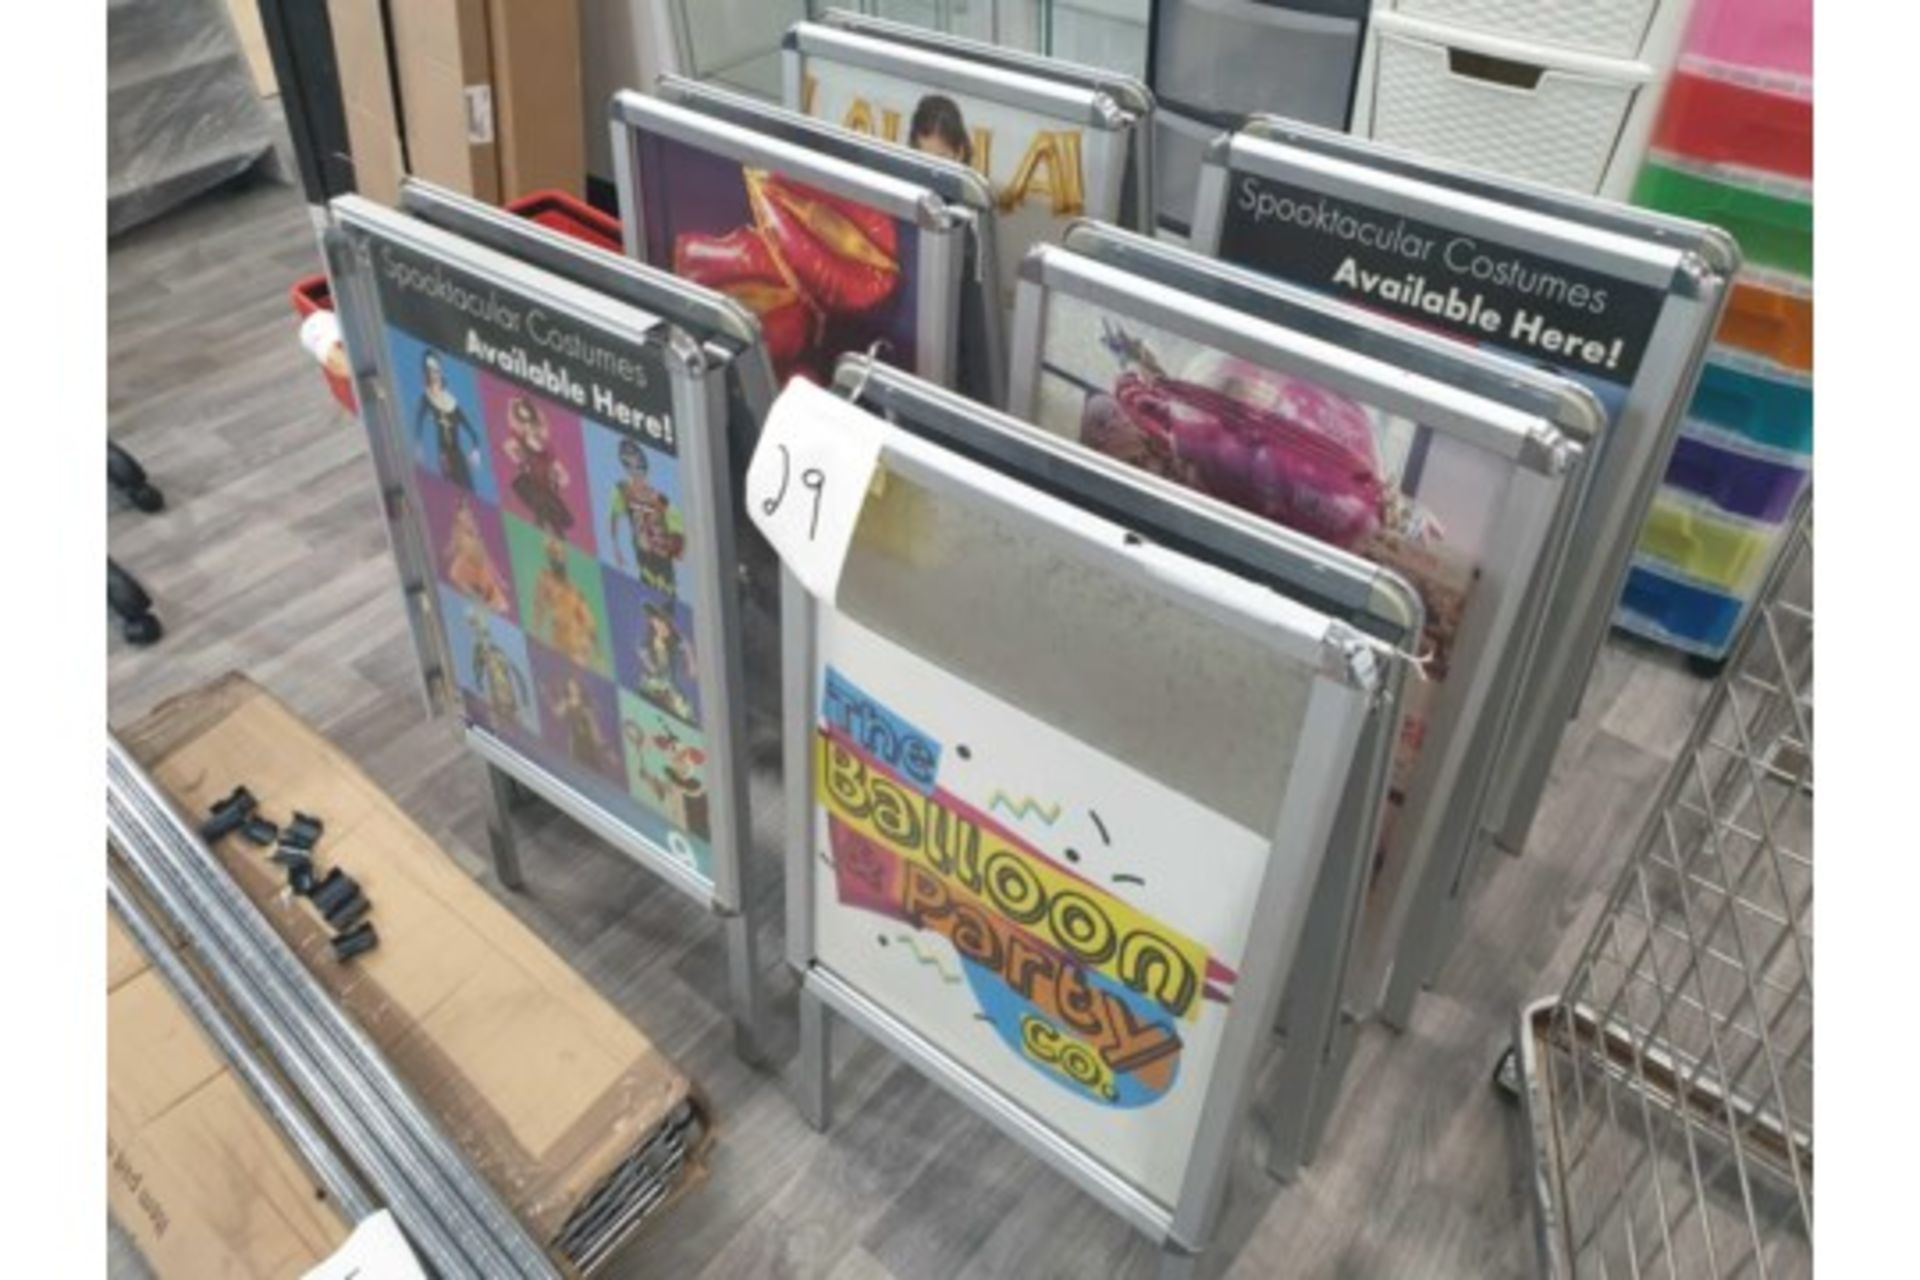 6 times shop display boards with clip out posters - Image 2 of 2